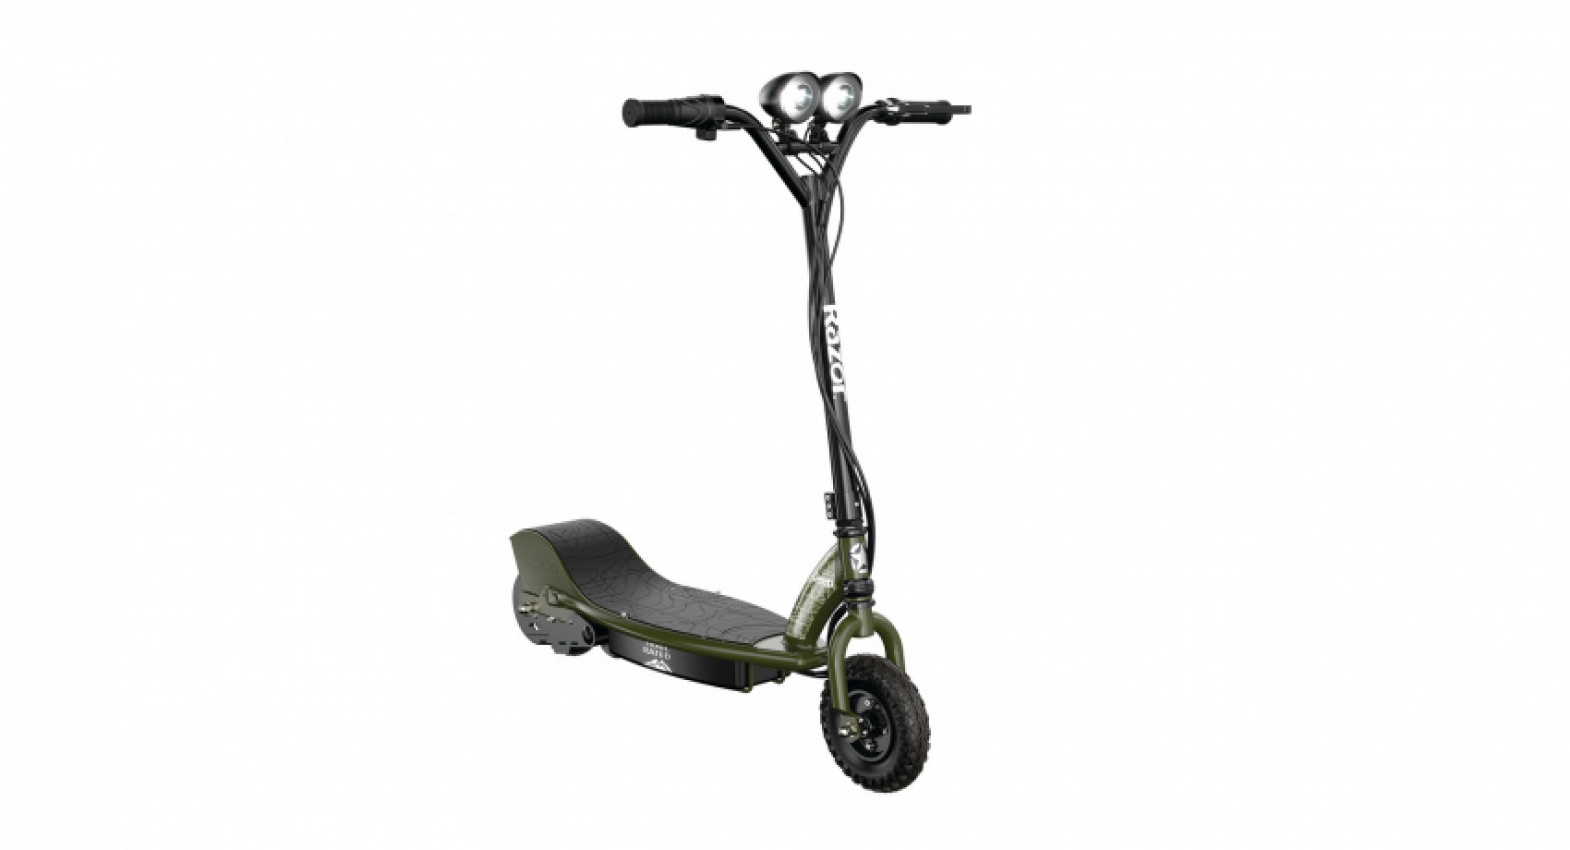 autos, cars, jeep, news, bicycles, electric vehicles, jeep adds skateparks to its go-anywhere promise with rx200 razor scooter